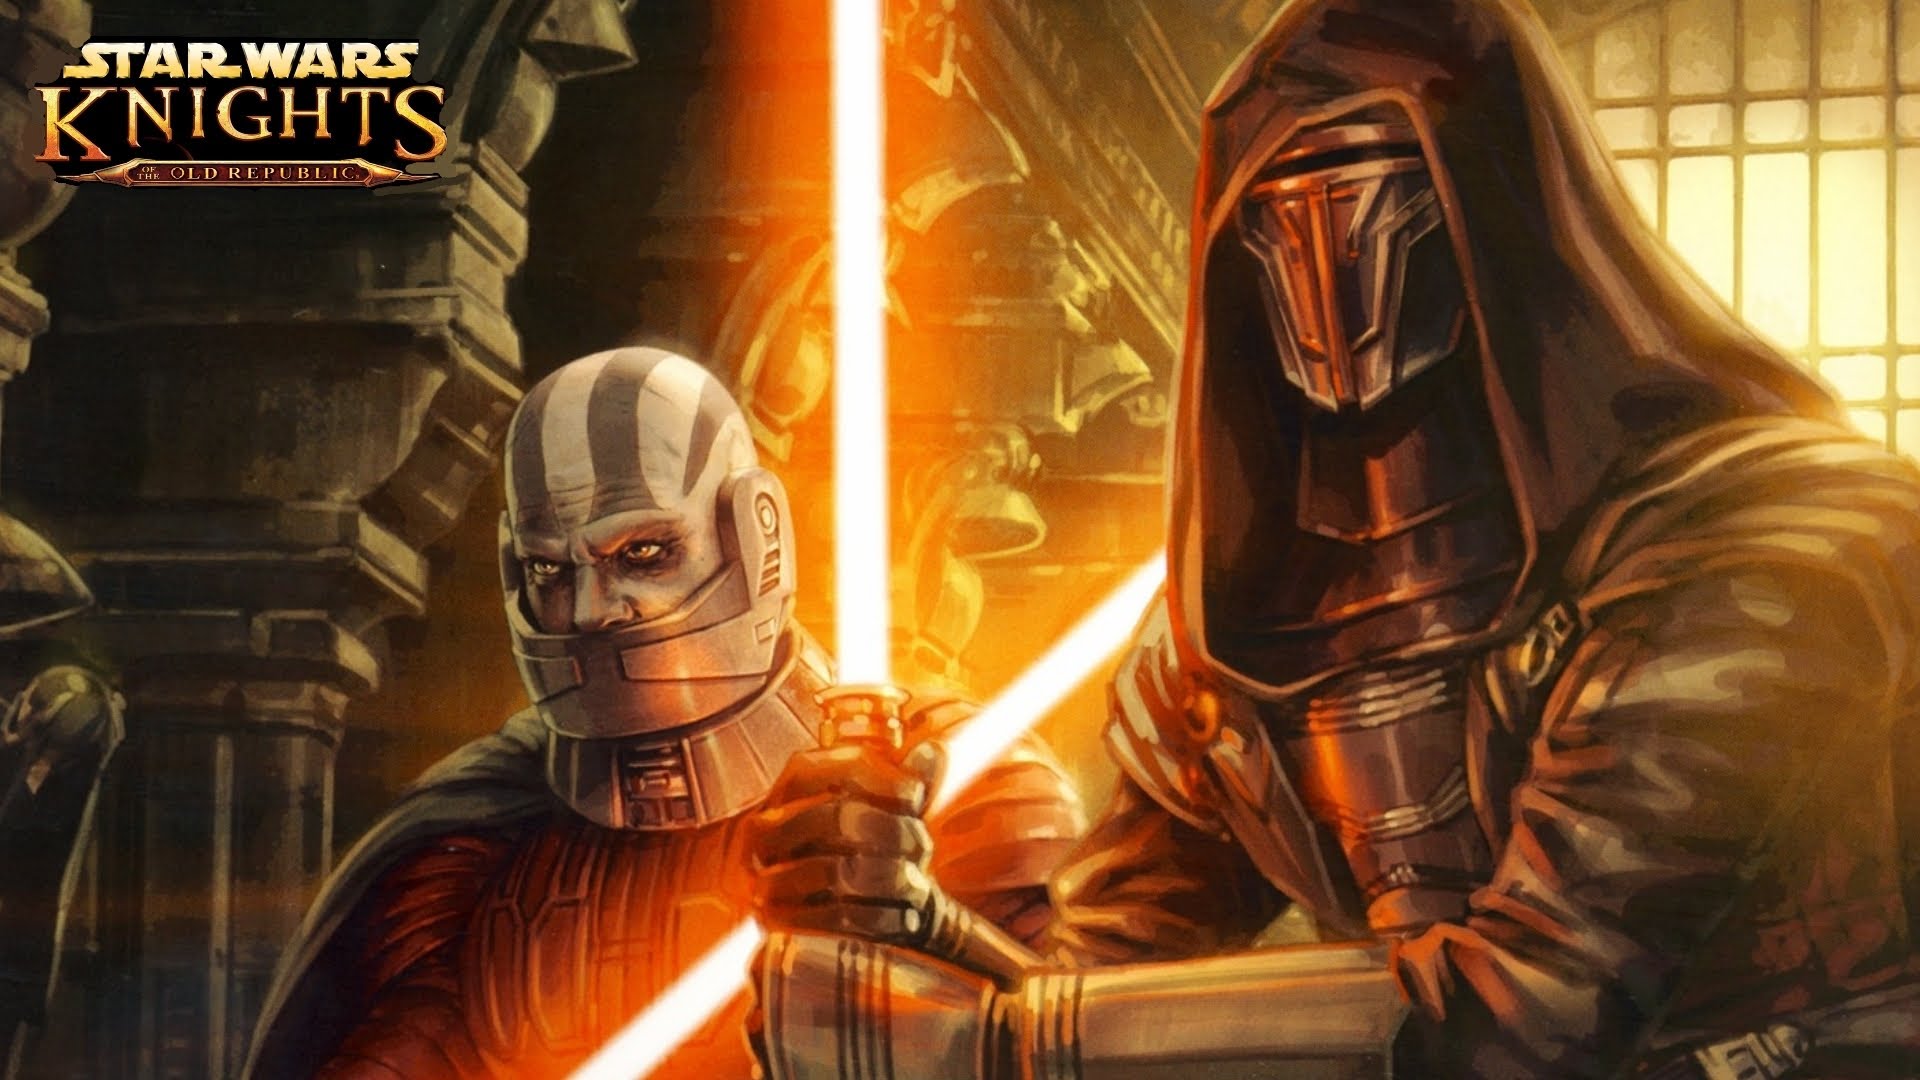 You are currently viewing Disney, vers une série Kights of the old republic en préparation ?